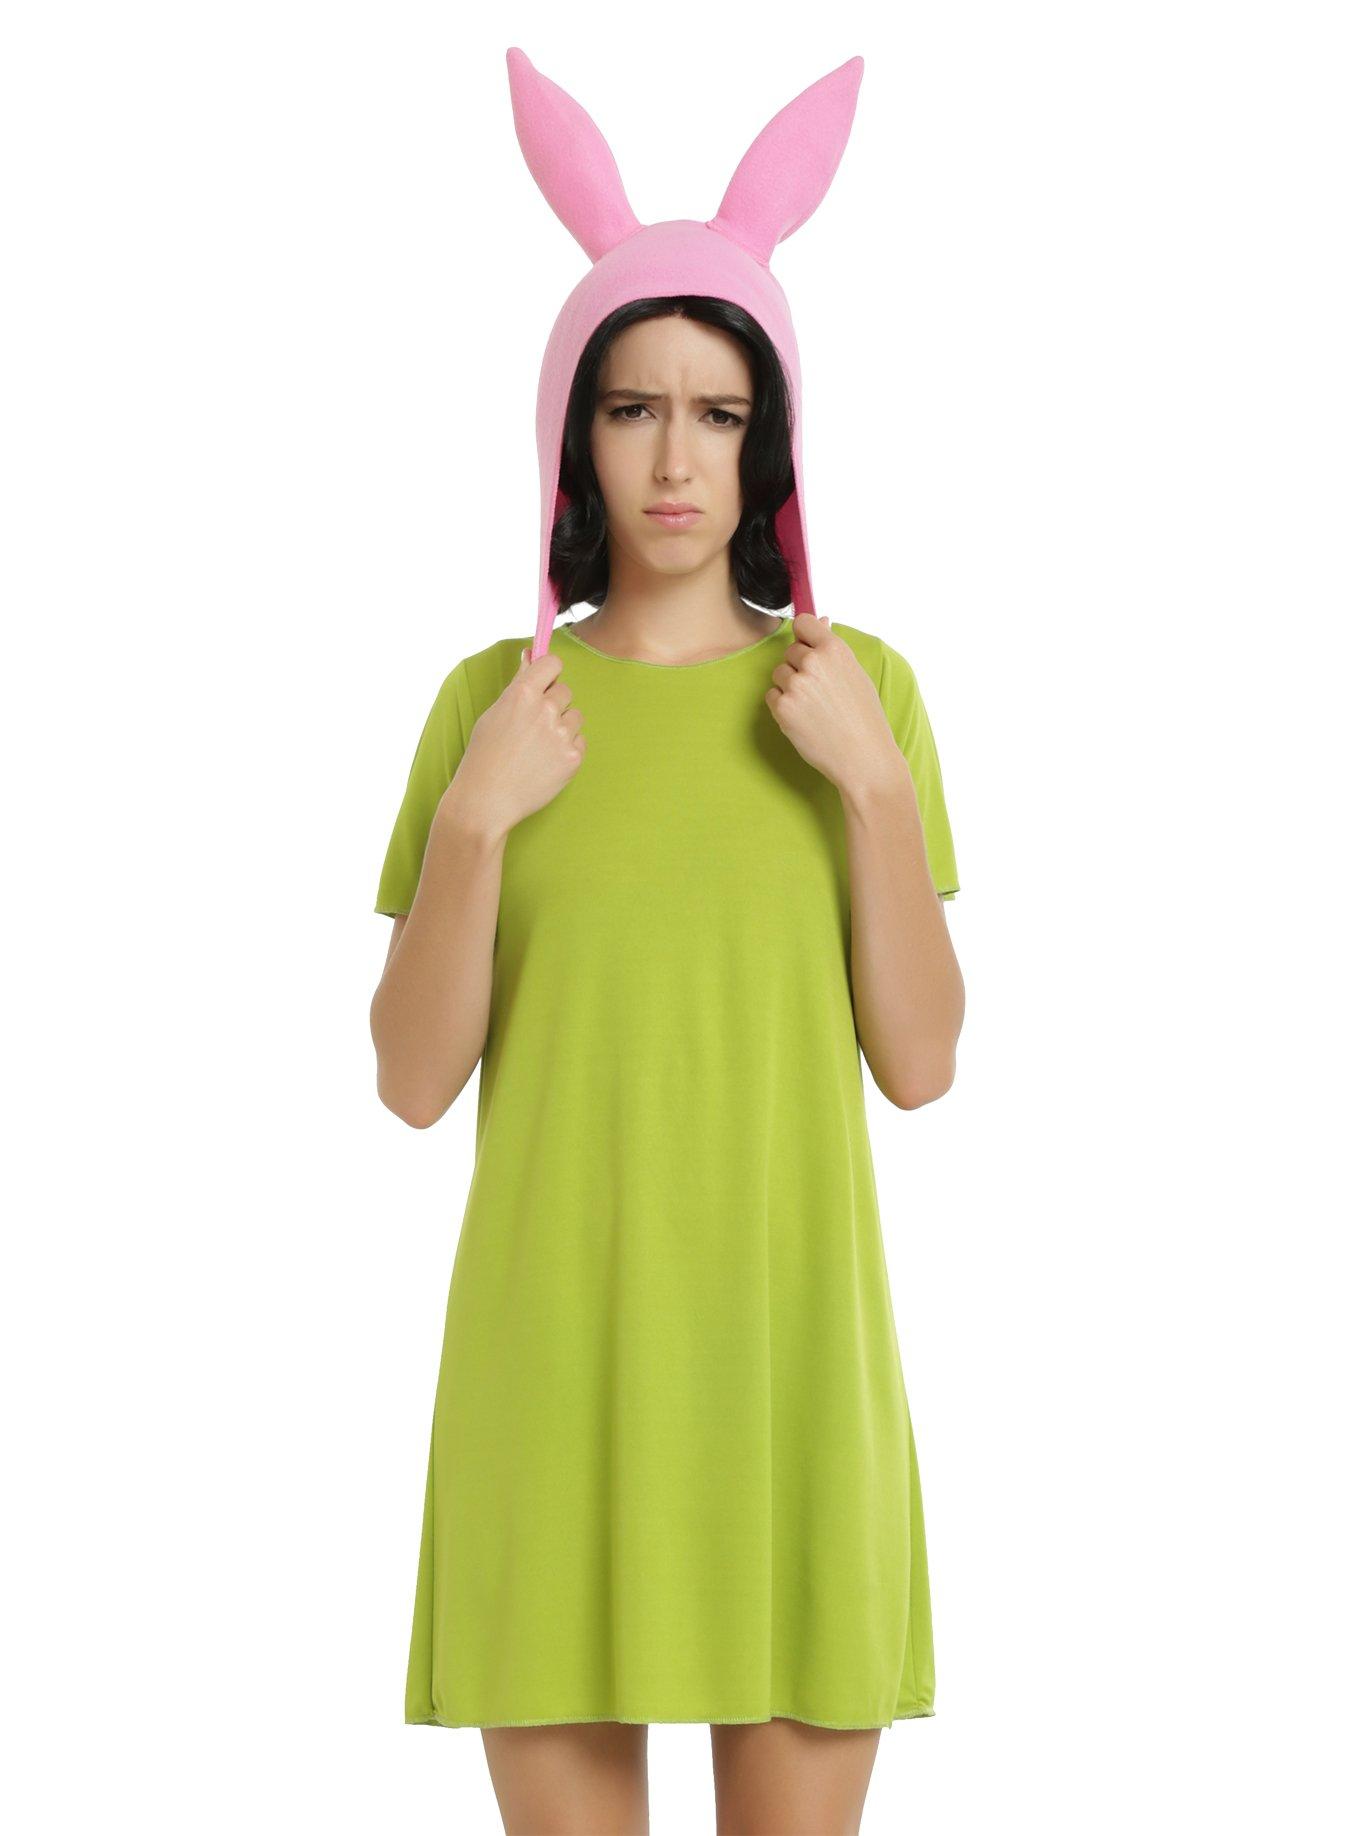 Louise Belcher dress for Halloween from Bobs Burgers :)